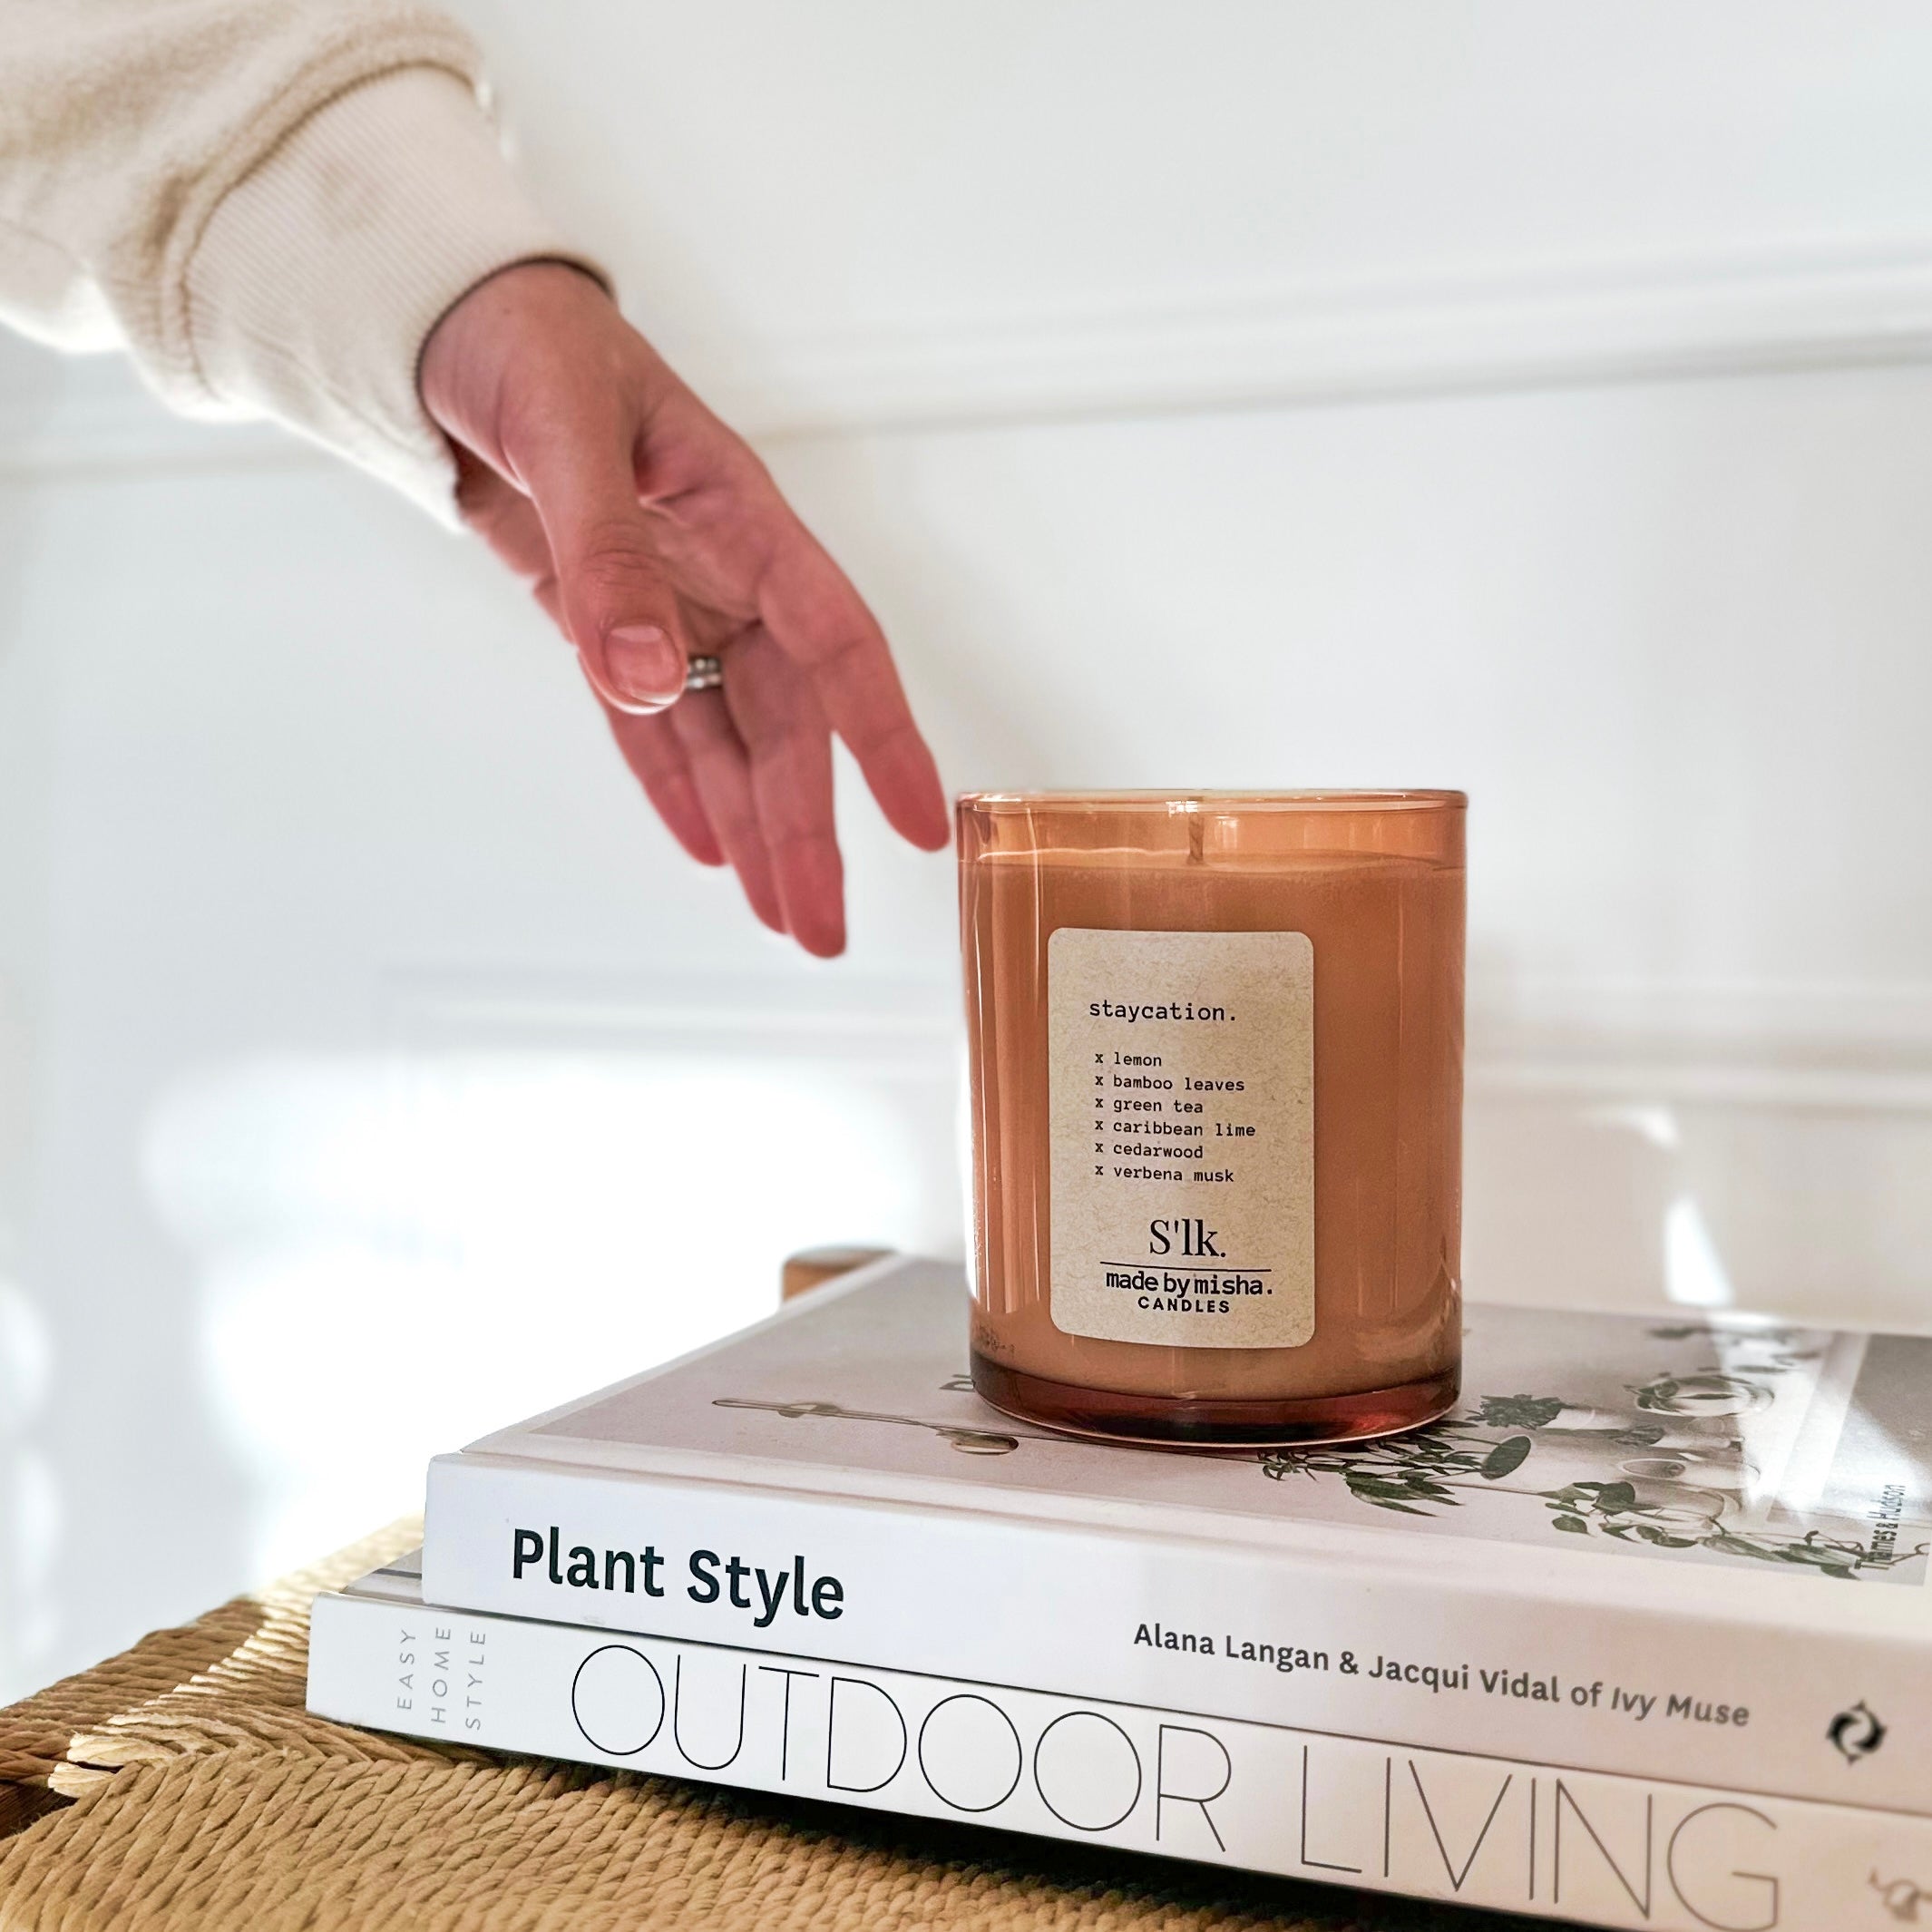 Collaboration Spotlight: Unveiling the 'Staycation' Candle - An Interview with SLK Soaps